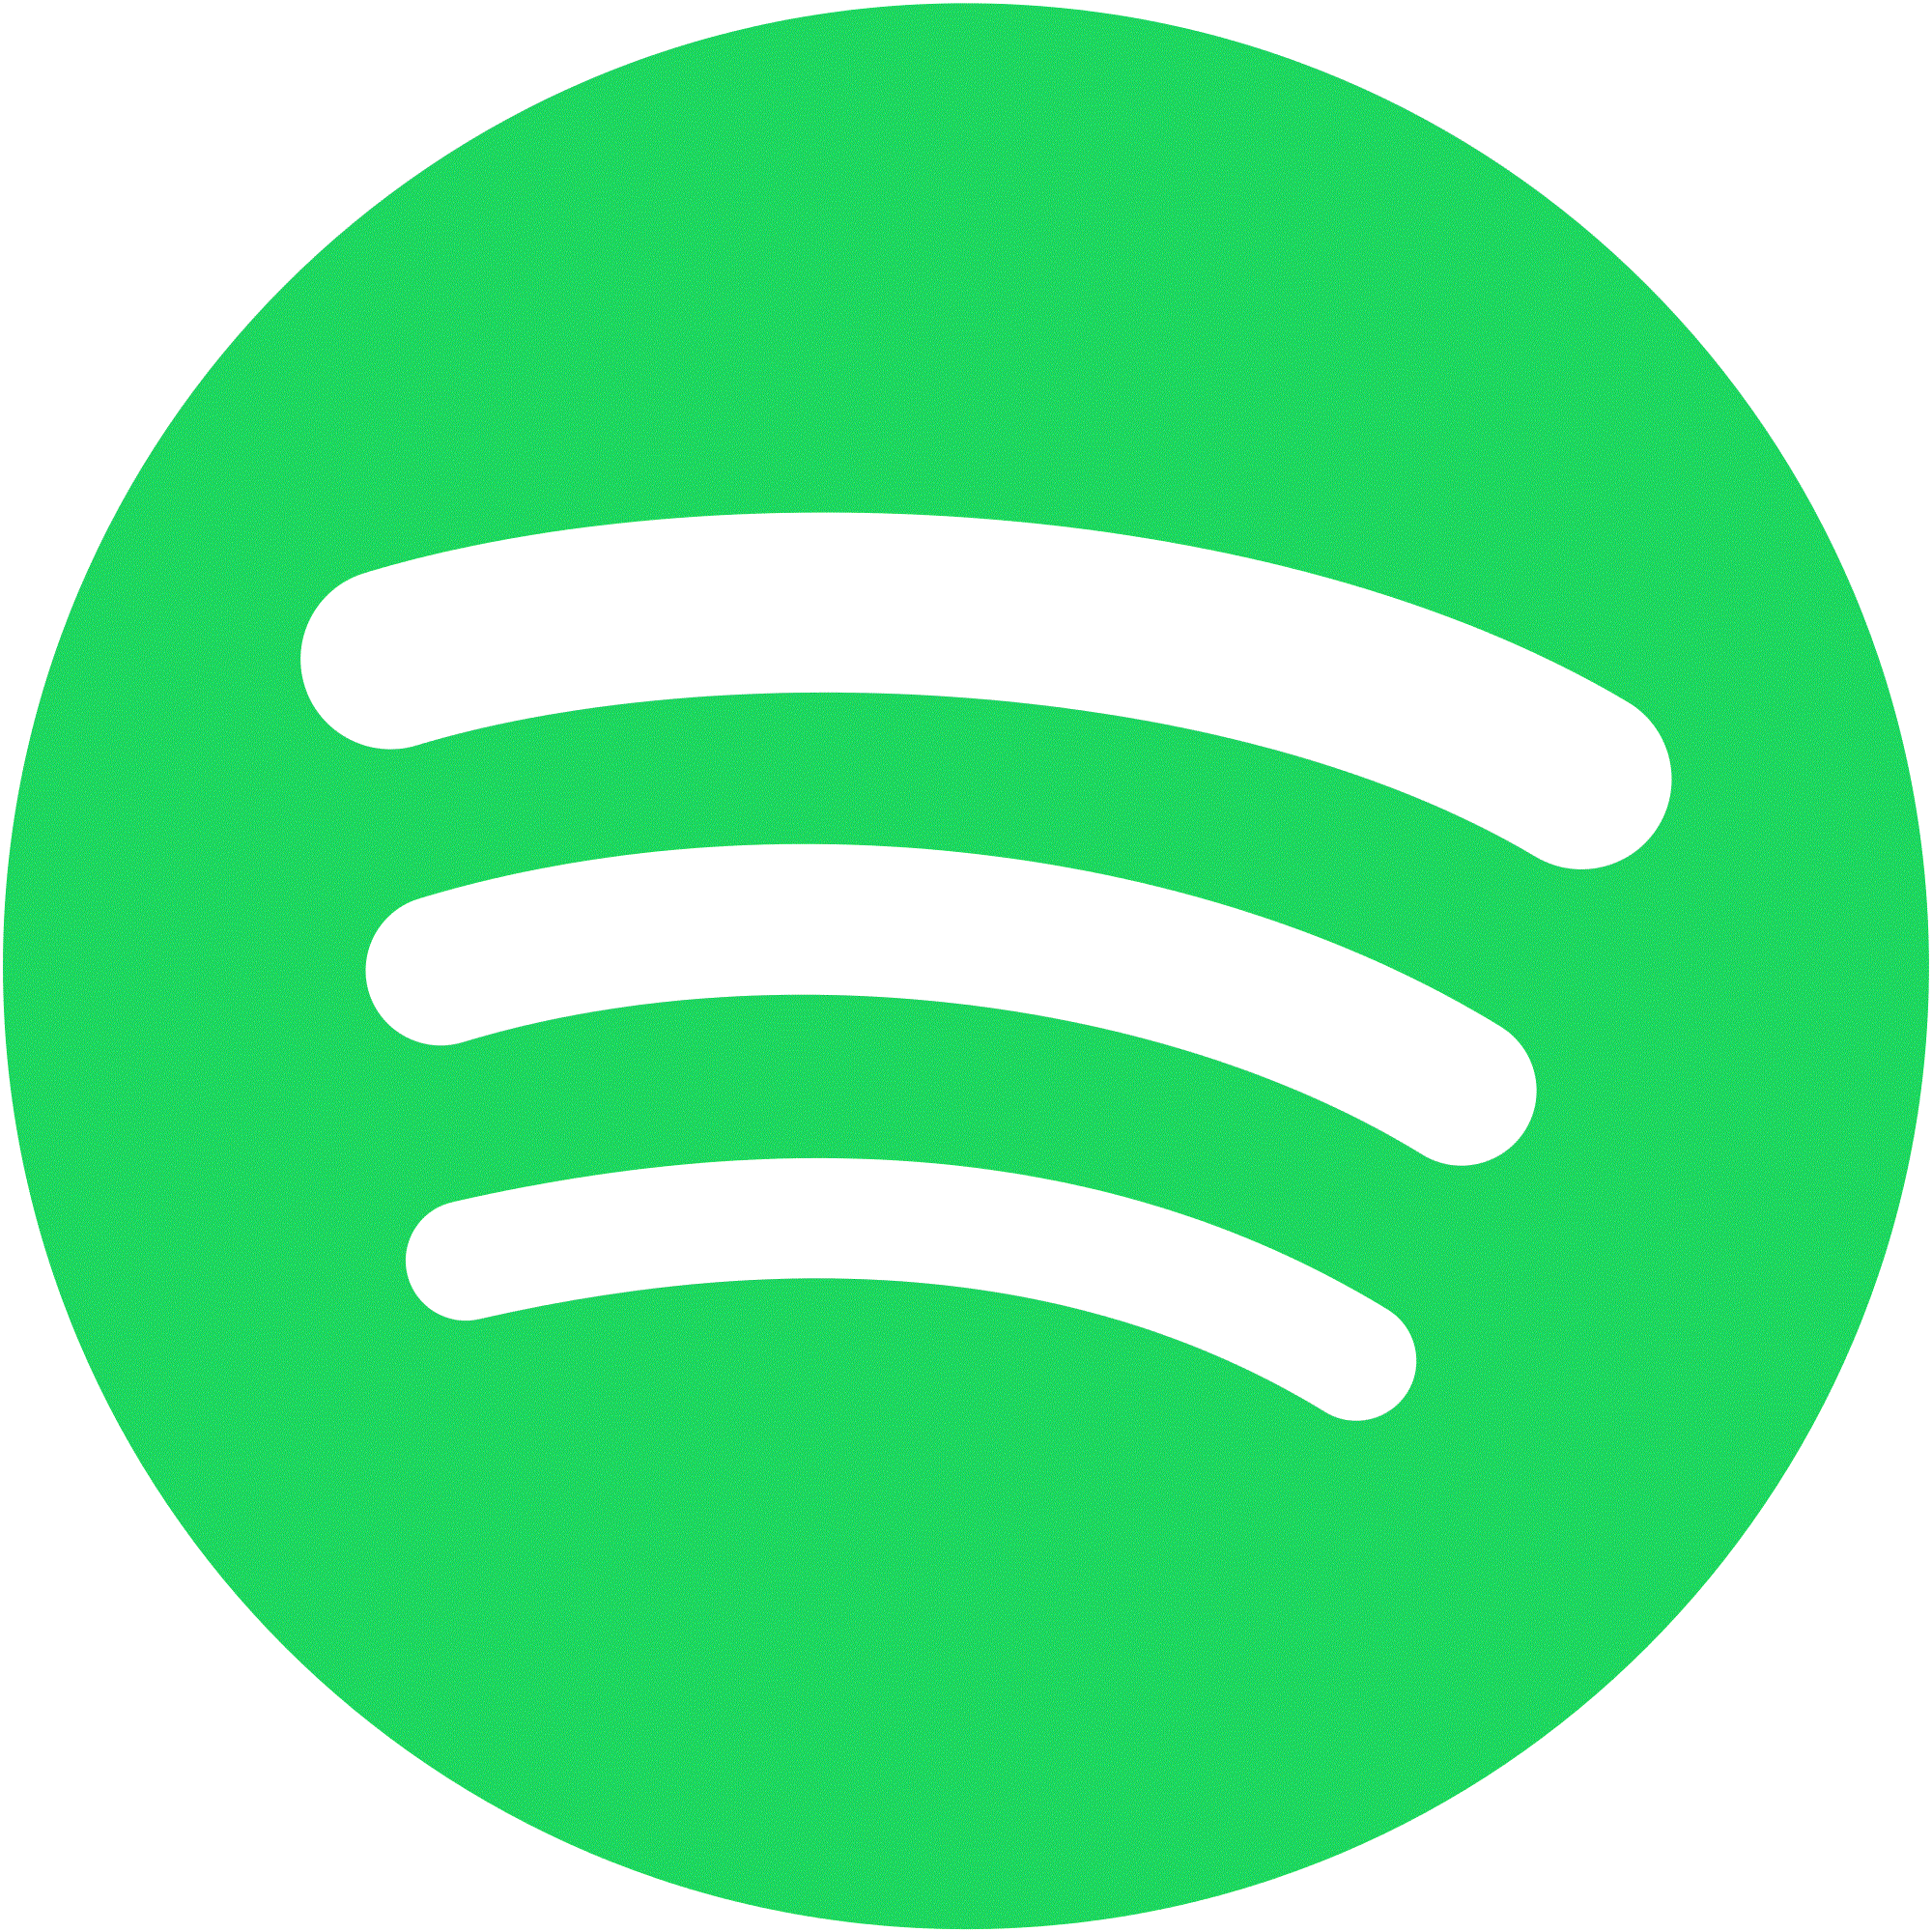 Spotify_Logo.gif Moonlyn, Moonlyn Music, Moonlyn's official website, Moonlyn, Moonlyn website, Blondes Prefer Gentlemen, Happiness, La la la Song, Possessed By Angels, Goddess, Three Little Birds Cover, Loves Shines, Life is Wonderful, Find Our Way Home, Paradise Found, Here and Now, Hope, Let's Come Together, In Heaven, Right Now, Never Coming Down, Unsung Hero, Come Alive, Storm, Fairy Tale, Butterfly Girl, Moonlyn, Butterfly Girl song, Butterfly Girl album, Butterfly Girl music, Moonlyn music, Blondes Prefer Gentlemen, Gentlemen Prefer Blondes, Marilyn Monroe Cover Song, I Wanna Be Loved By You, Jayne Mansfield Look-a-like, blonde bombshell, long blonde hair, girl power, moon music, moon goddess, Goddess, Lady Godiva